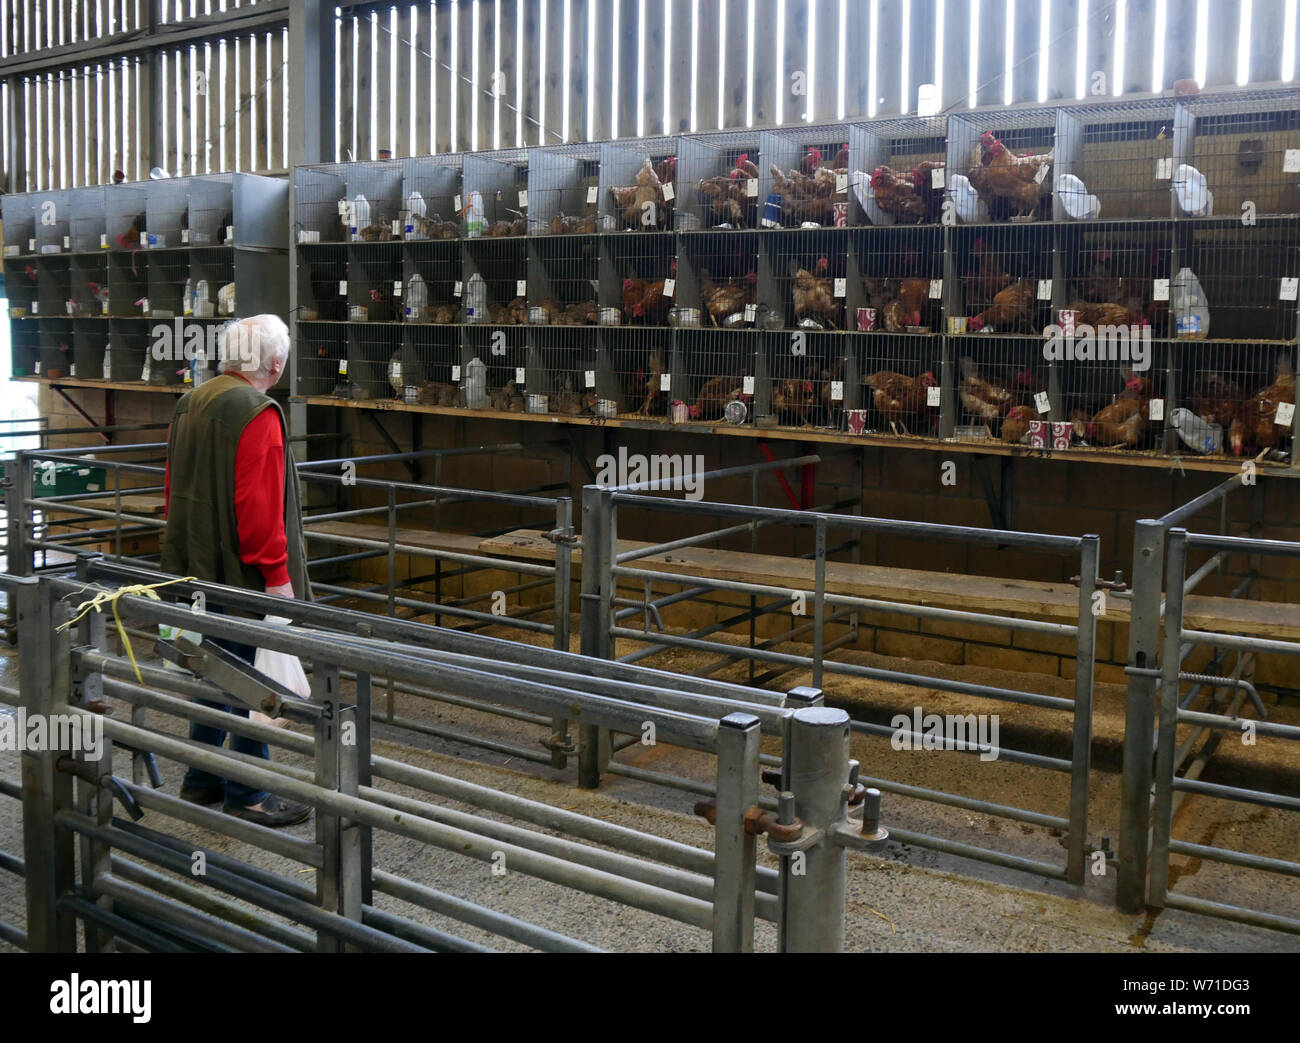 Caged livestock lotted up and ready to be sold at a traditional poultry auction in England UK photo DON TONGE Stock Photo